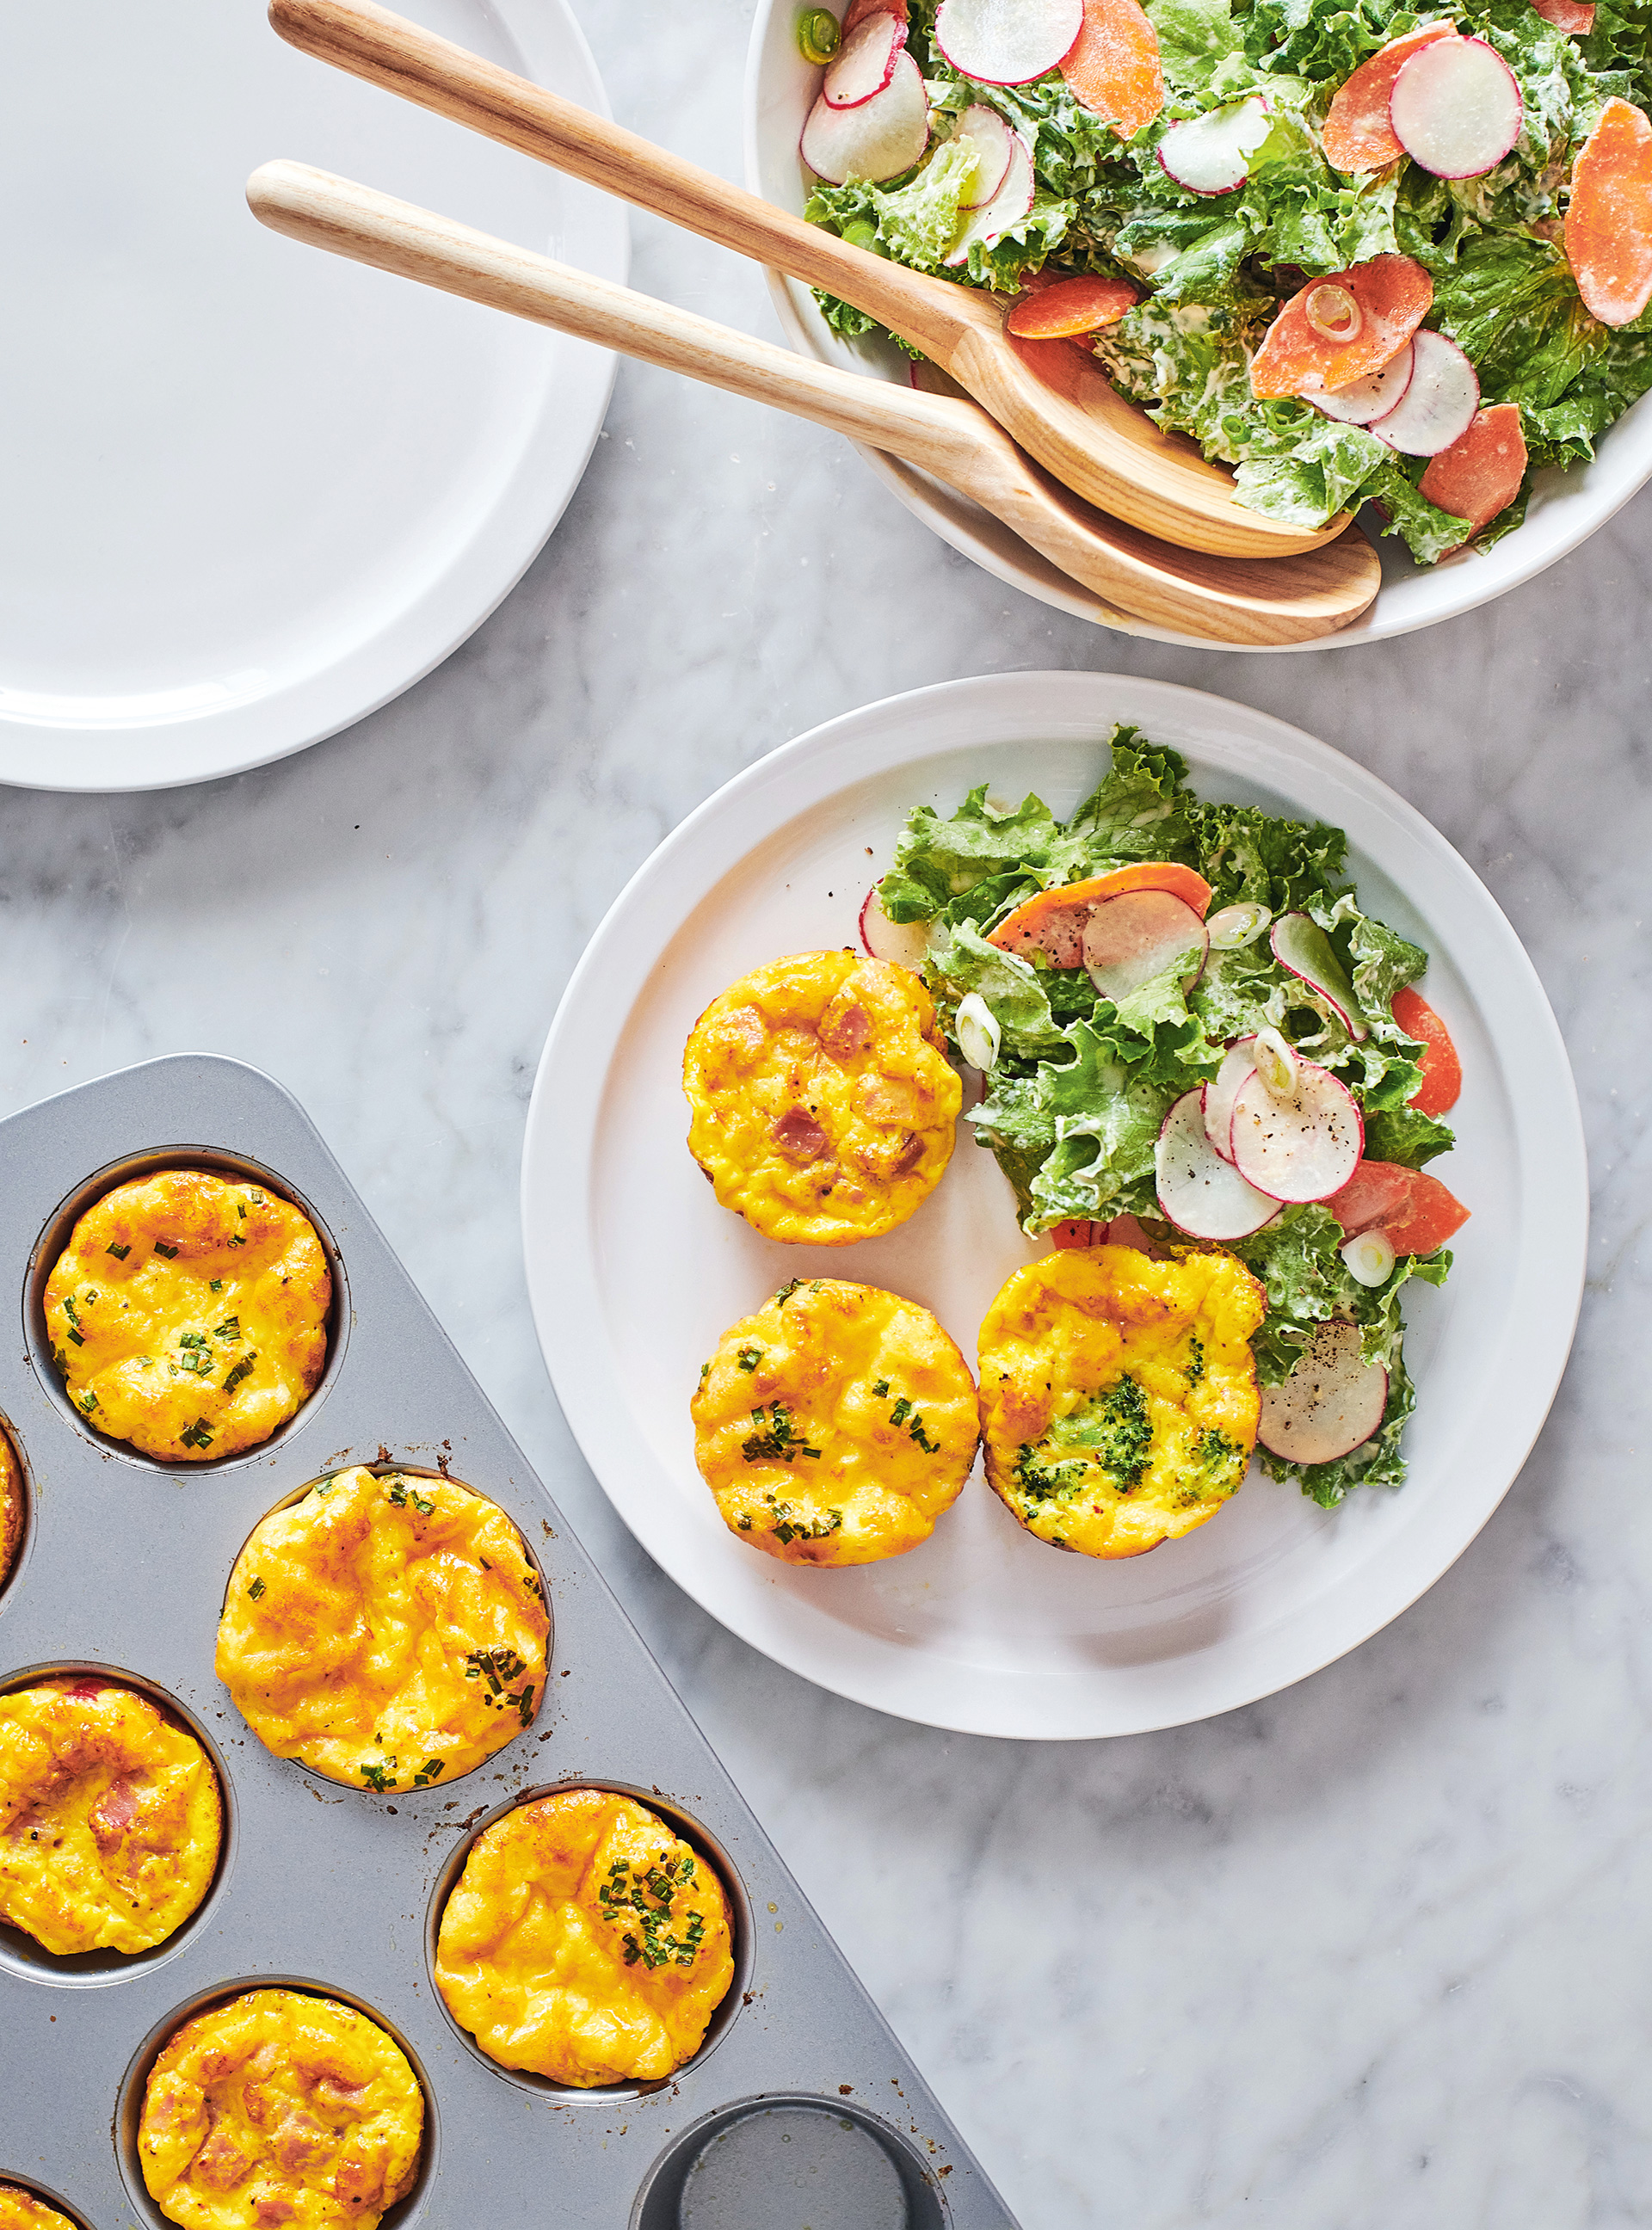 Mini Cheese Omelettes with Creamy Vegetable Salad